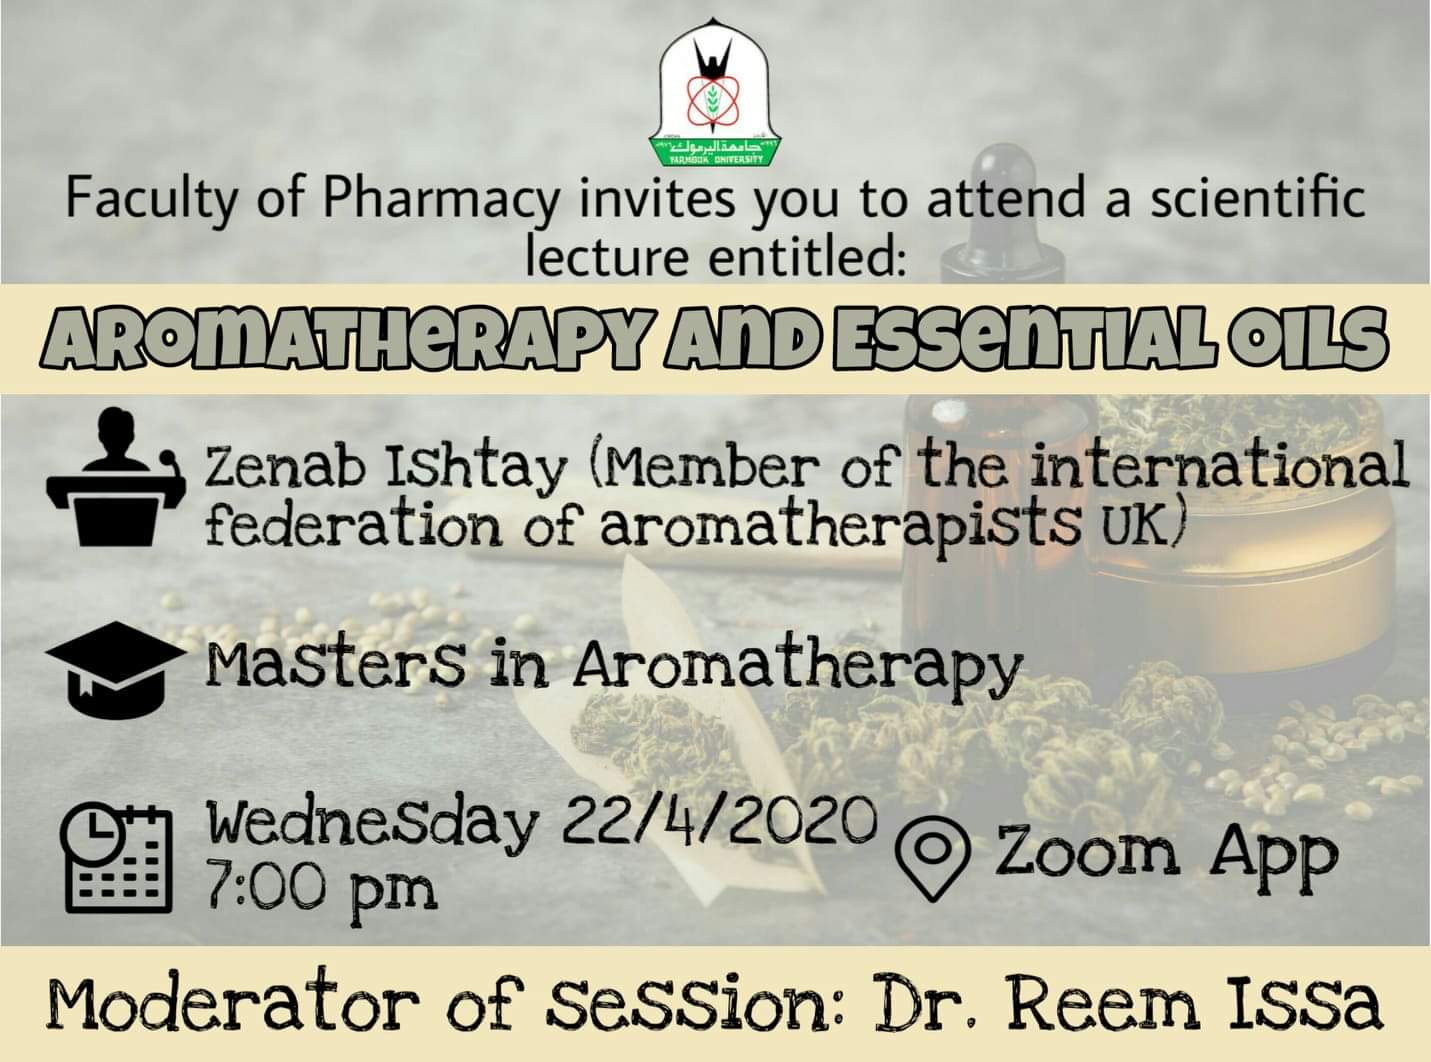 Faculty of pharmacy Holds a scientific lecture entitled "Aromatherapy and Essential Oils" remotely